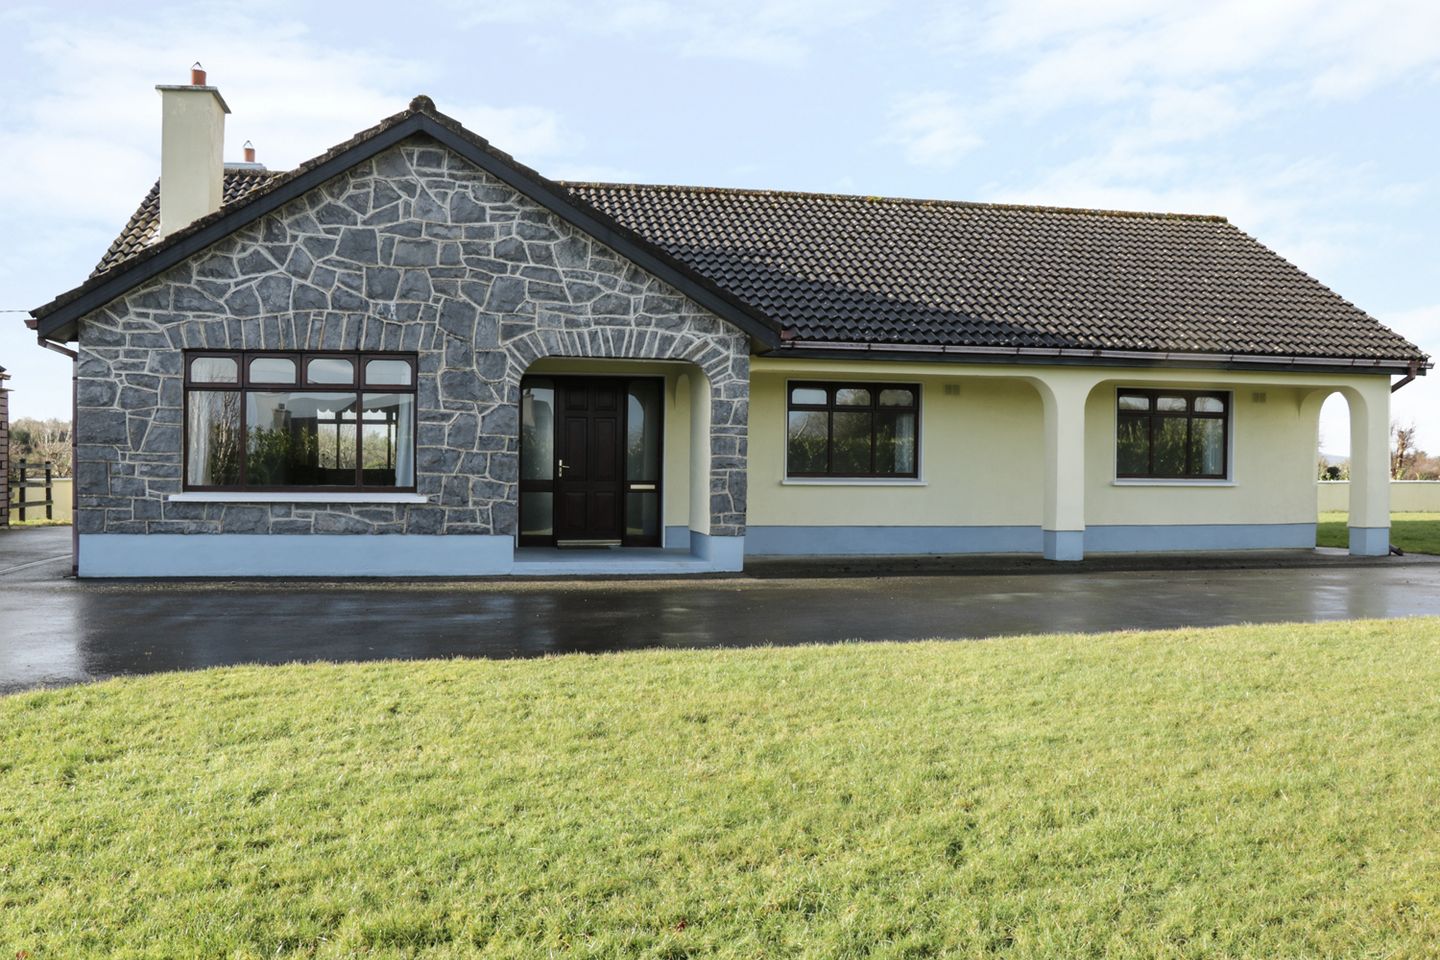 Ref. 961519 Castle View, Ardnesella, Oughterard, Co. Galway